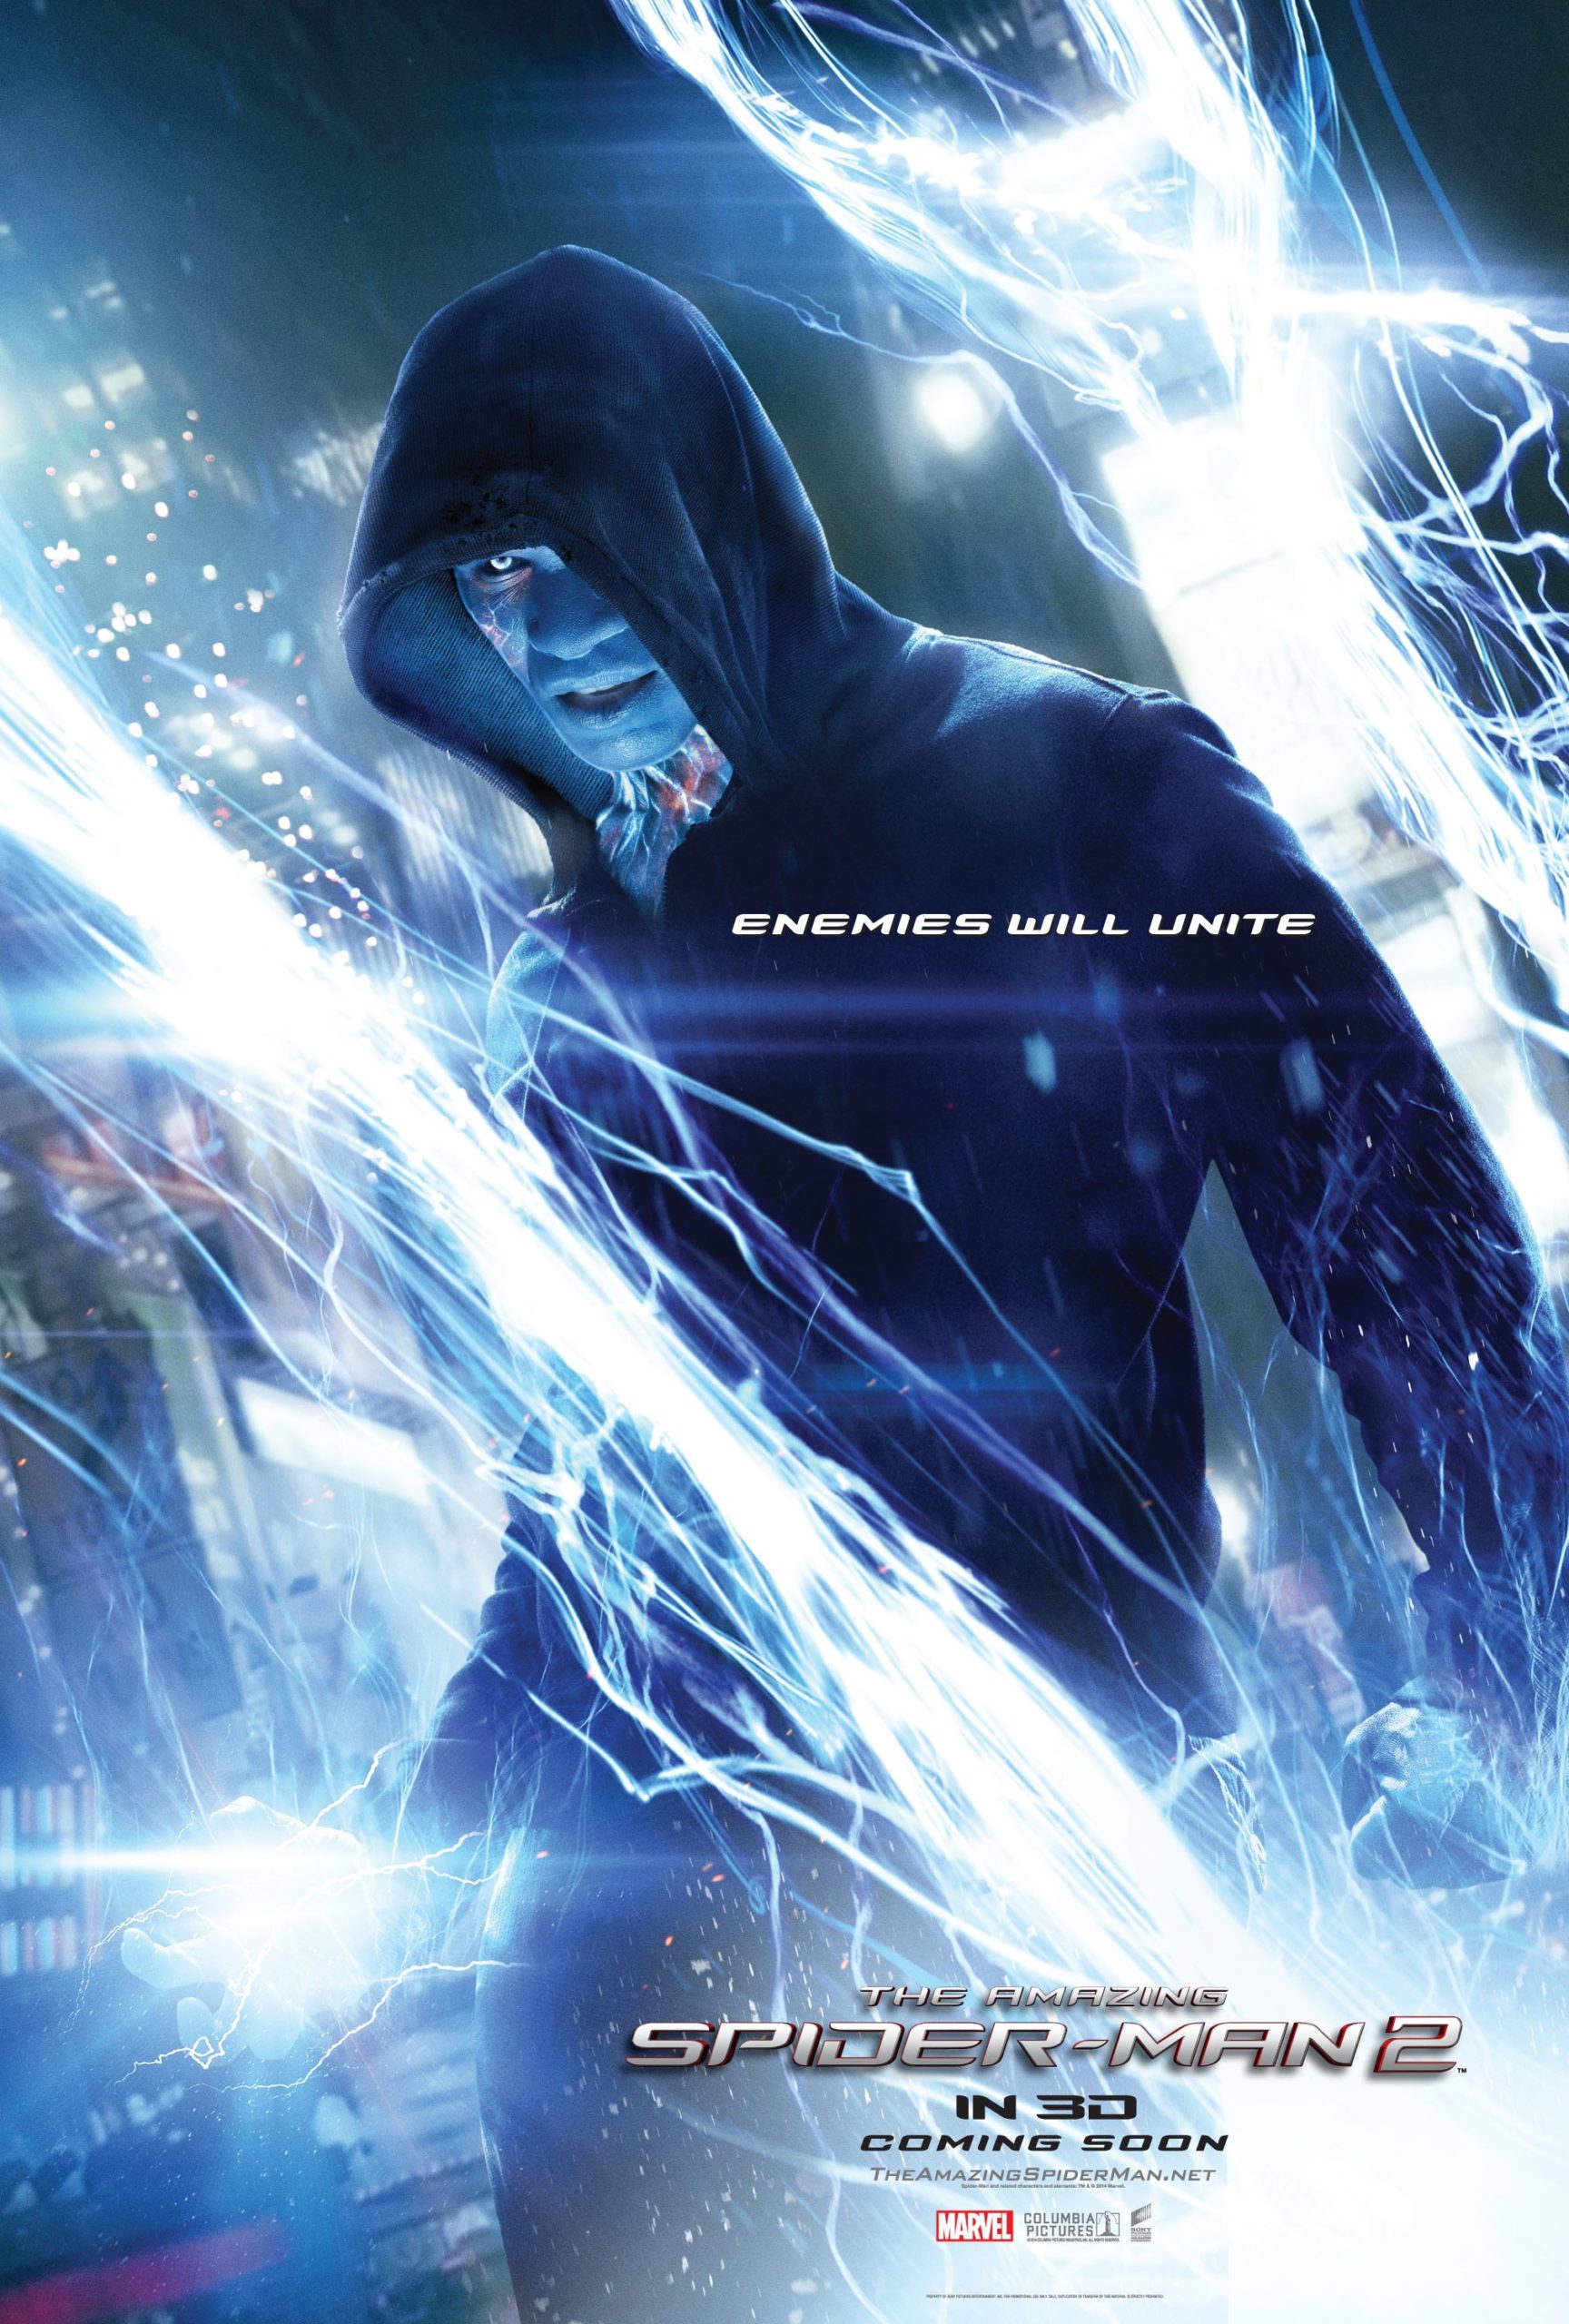 Jaime Foxx as Electro in The Amazing Spider-Man 2